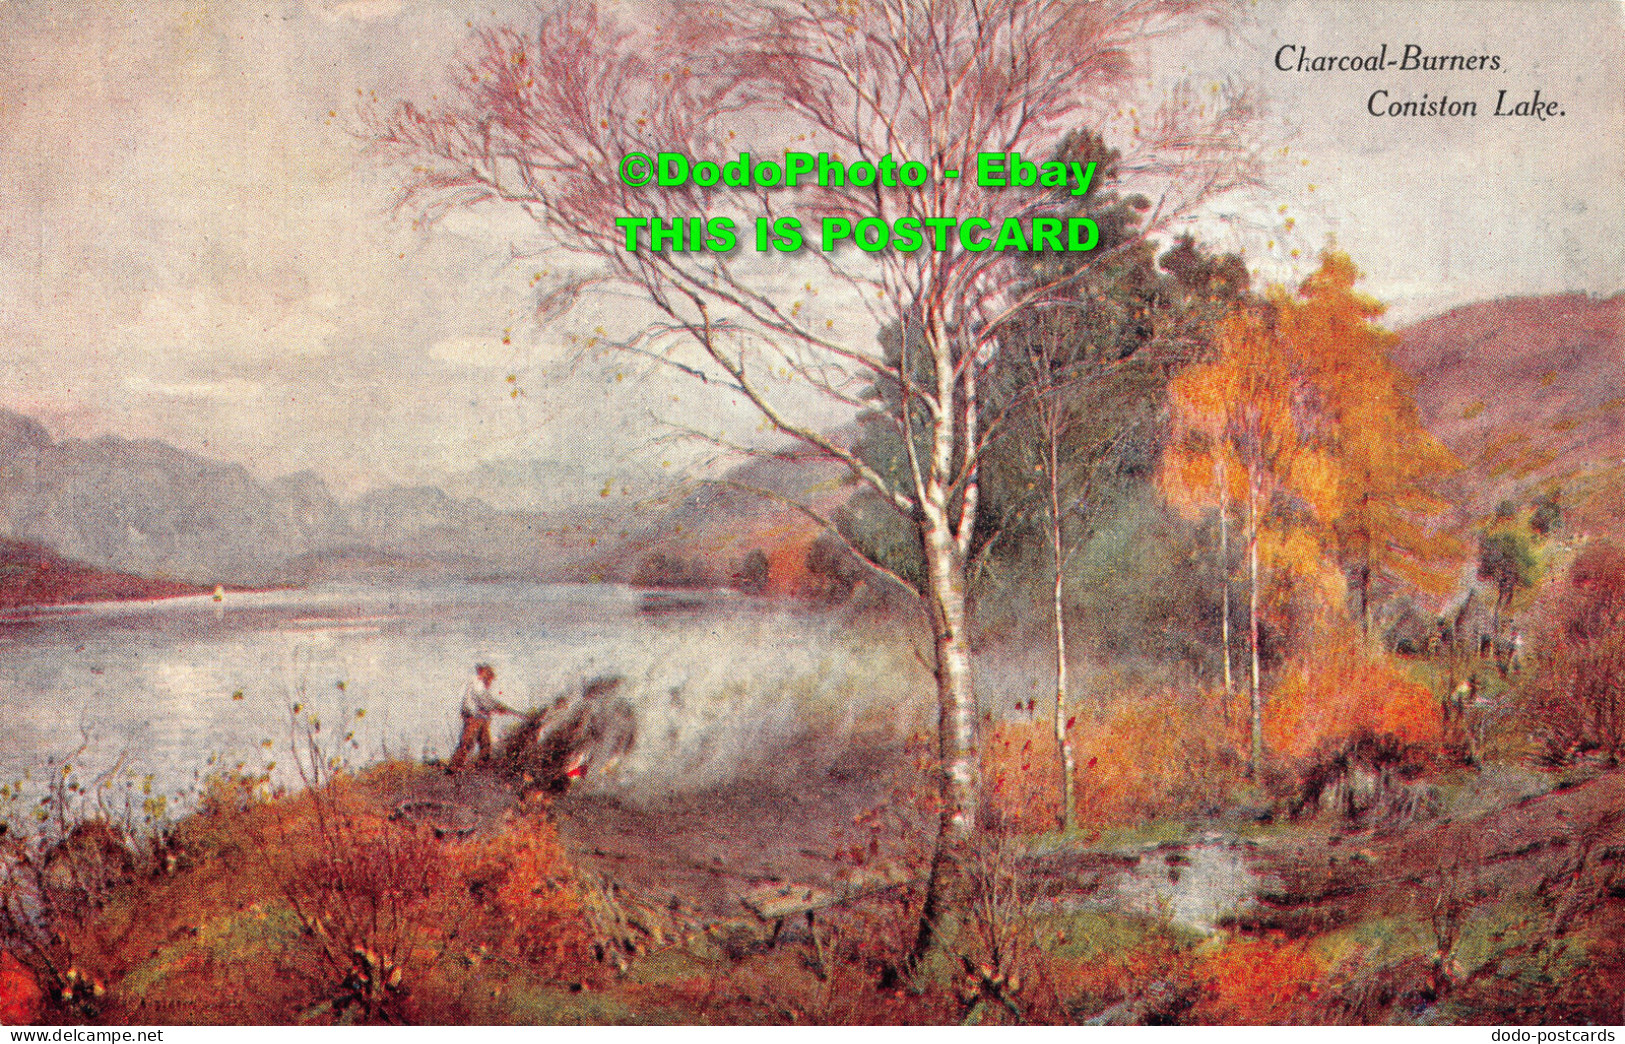 R355838 Coniston Lake. Charcoal Burners. A. And C. Black. The English Lakes. Ser - World